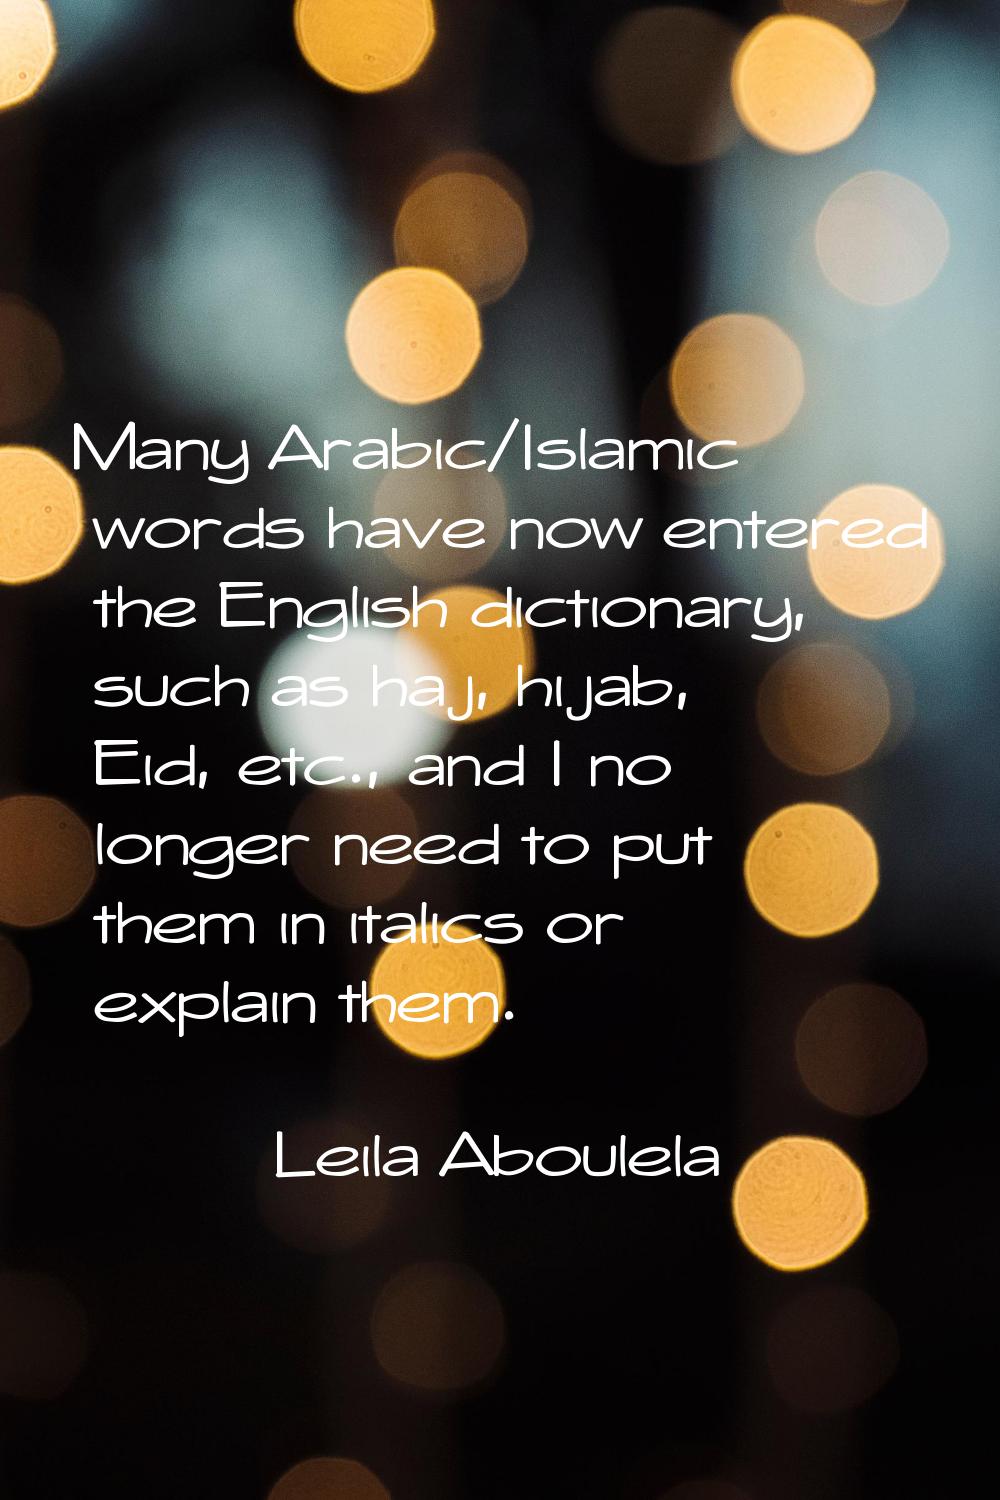 Many Arabic/Islamic words have now entered the English dictionary, such as haj, hijab, Eid, etc., a